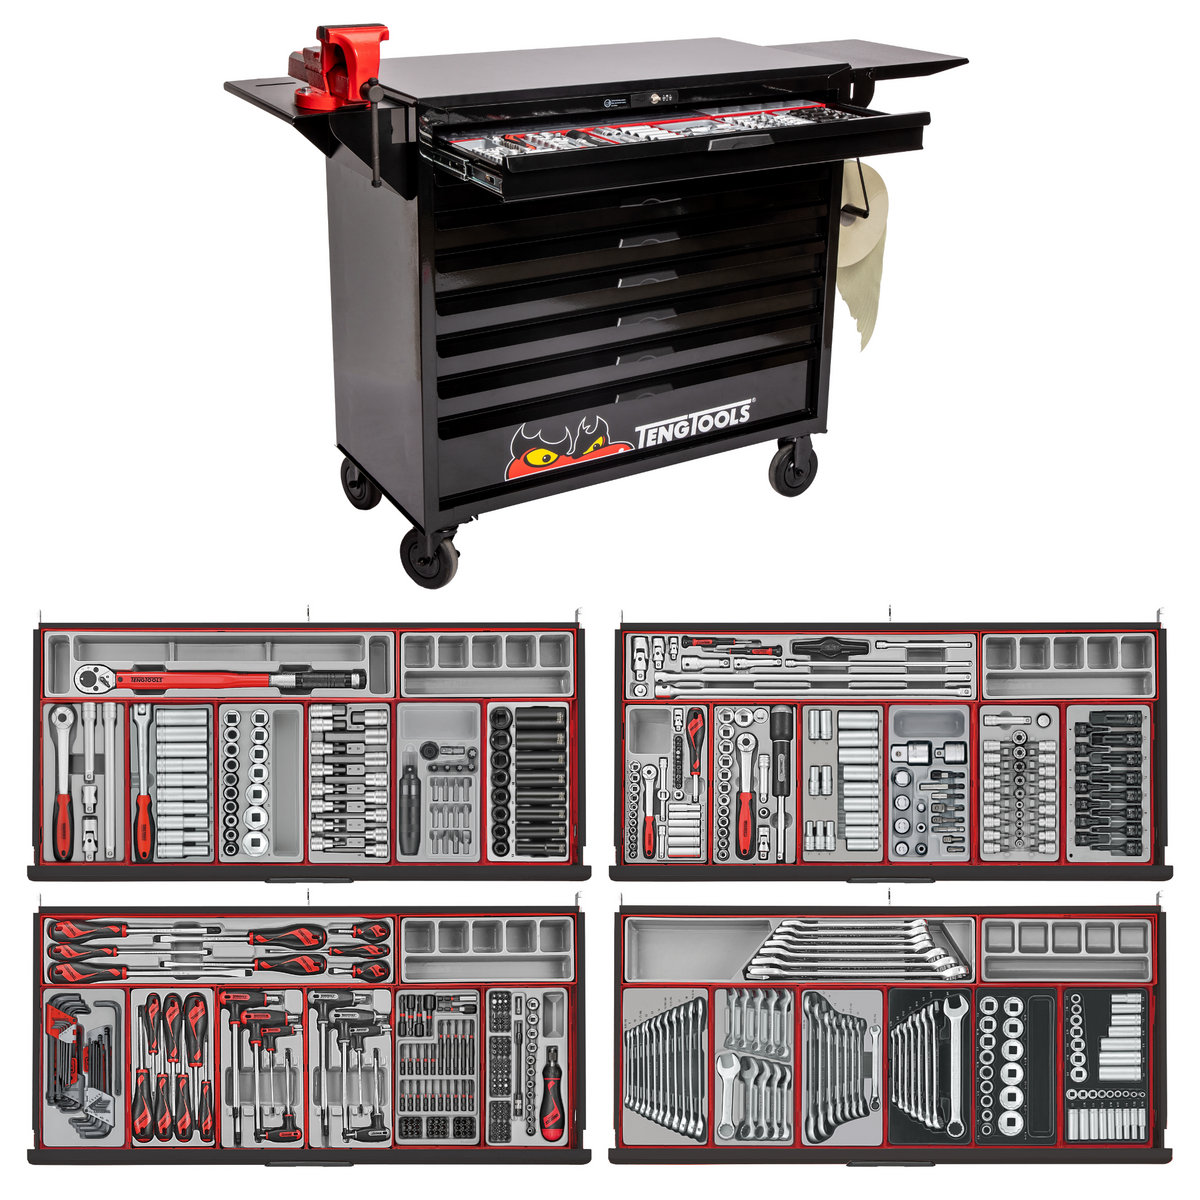 Teng Tools 1004 Piece 'Limited Edition' 37 Inch Wide 8 Drawer Black Ro